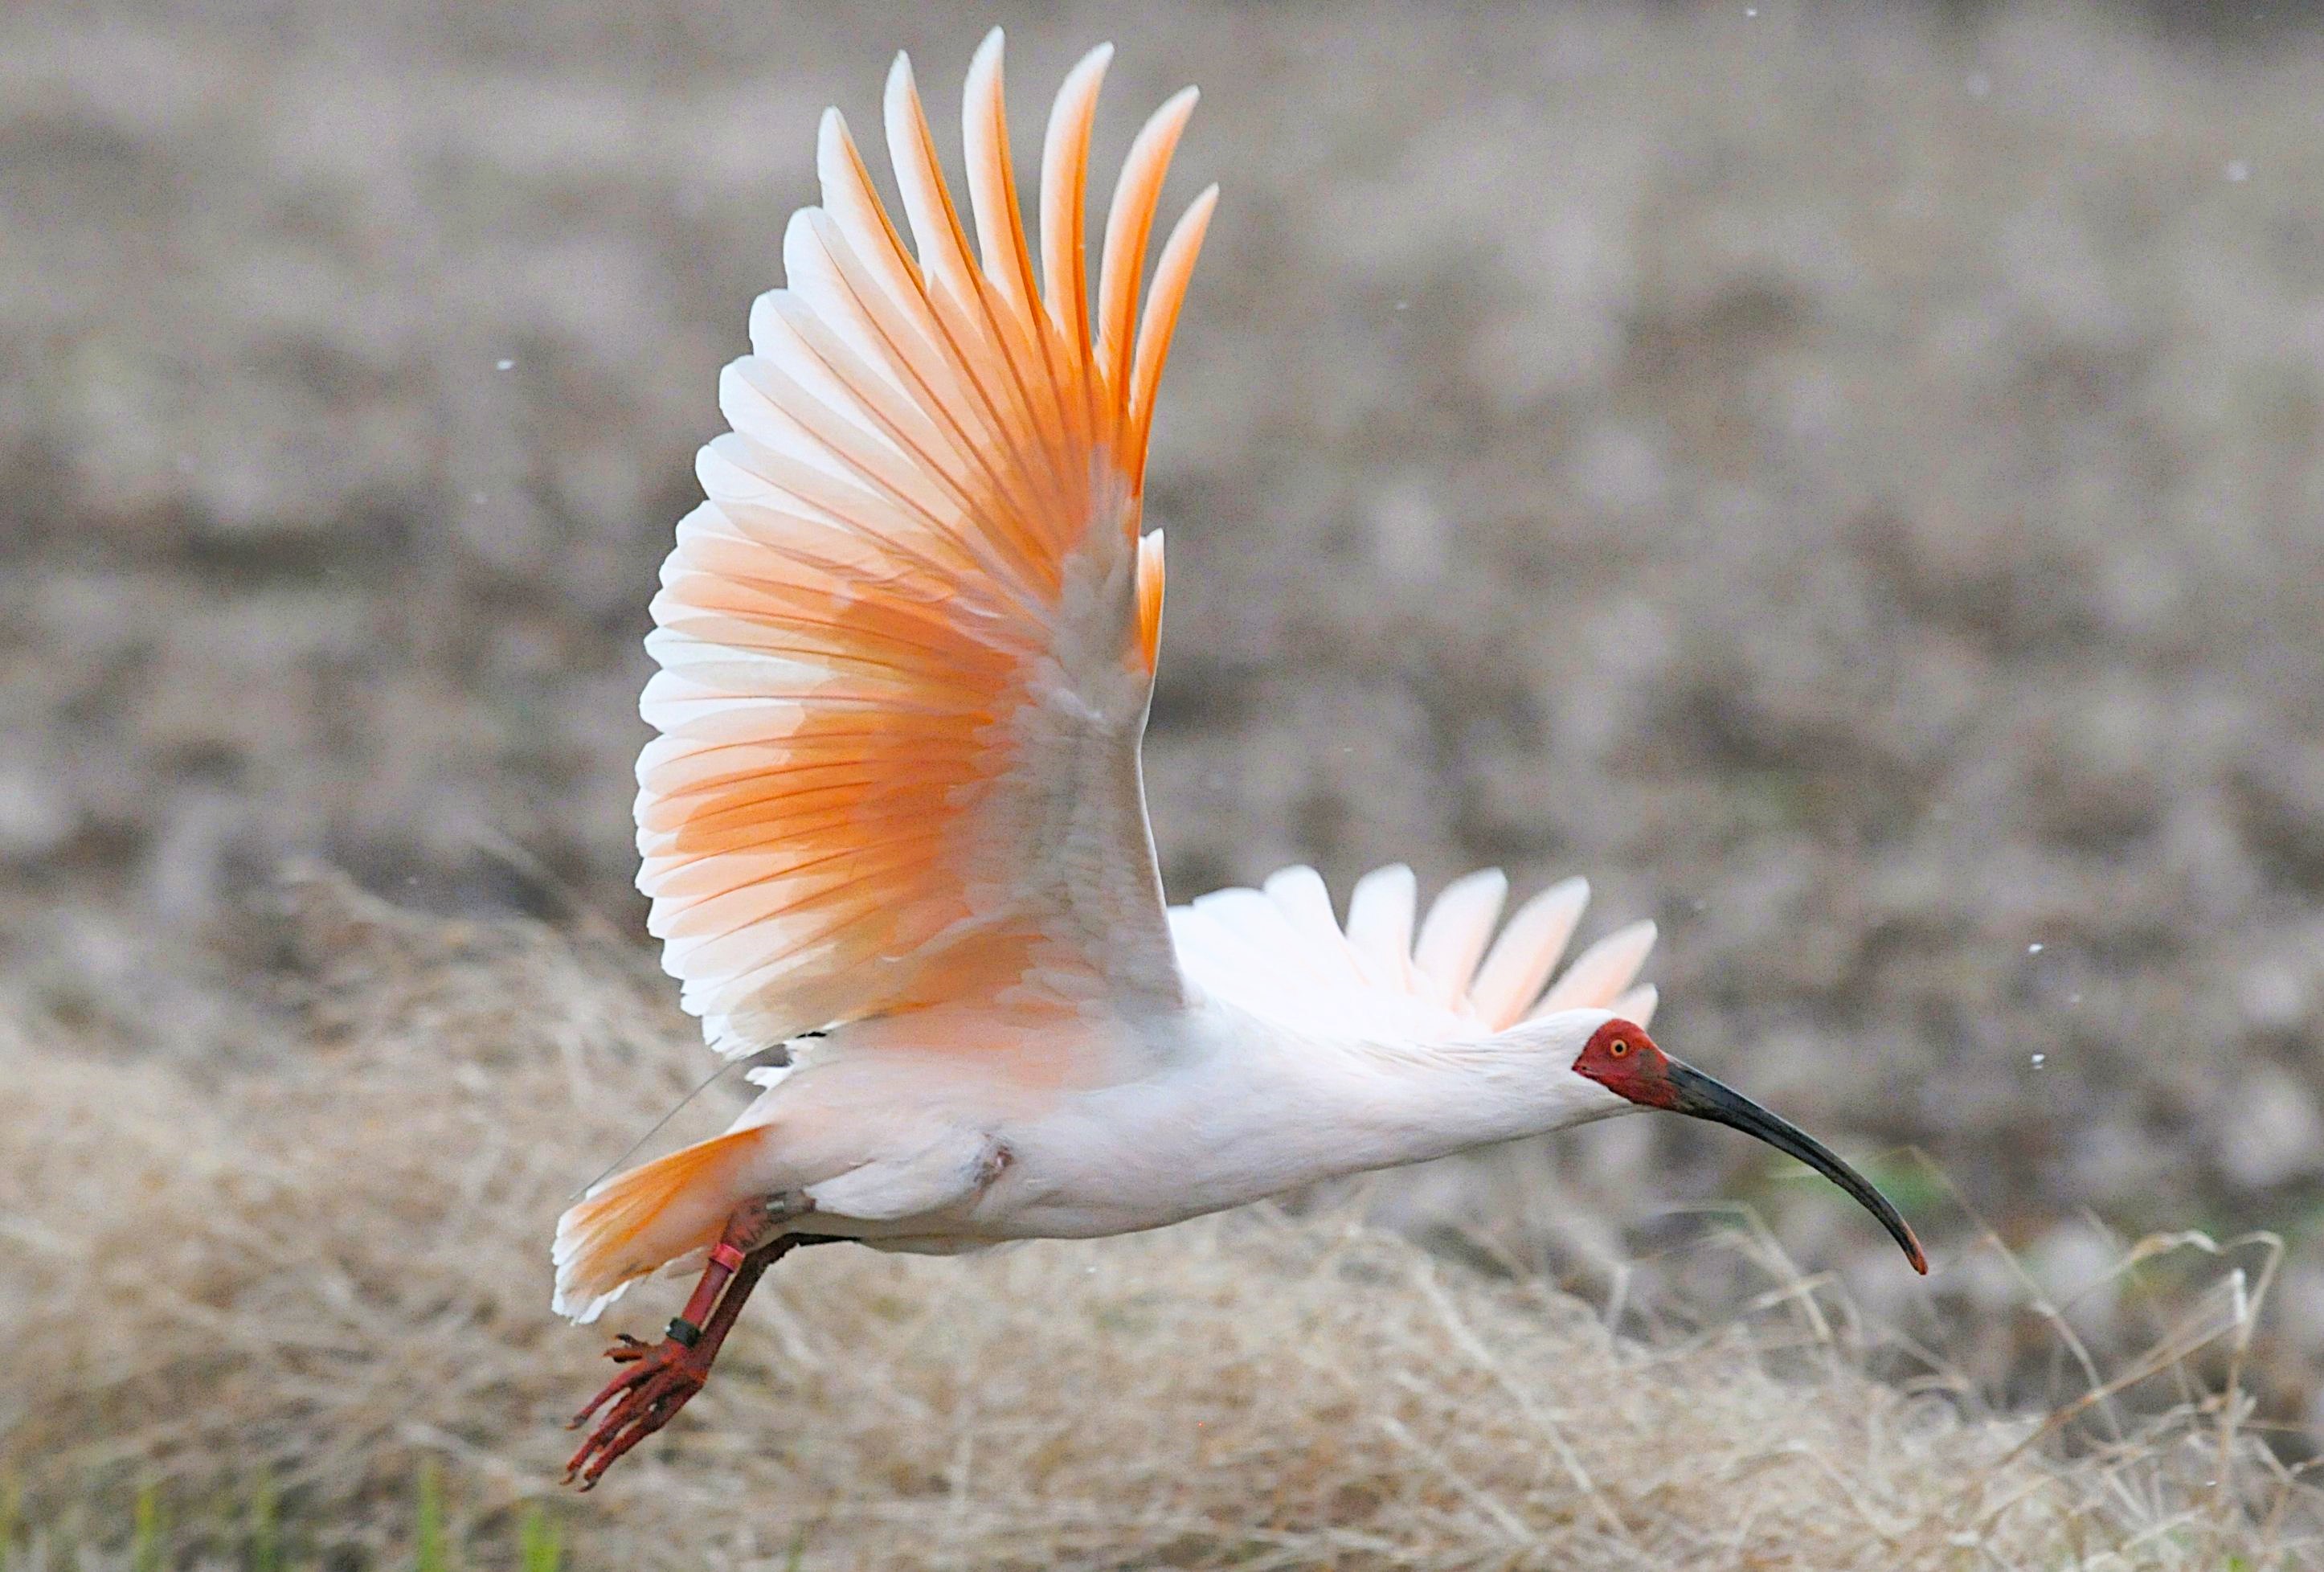 Rewilding of the Crested Ibis